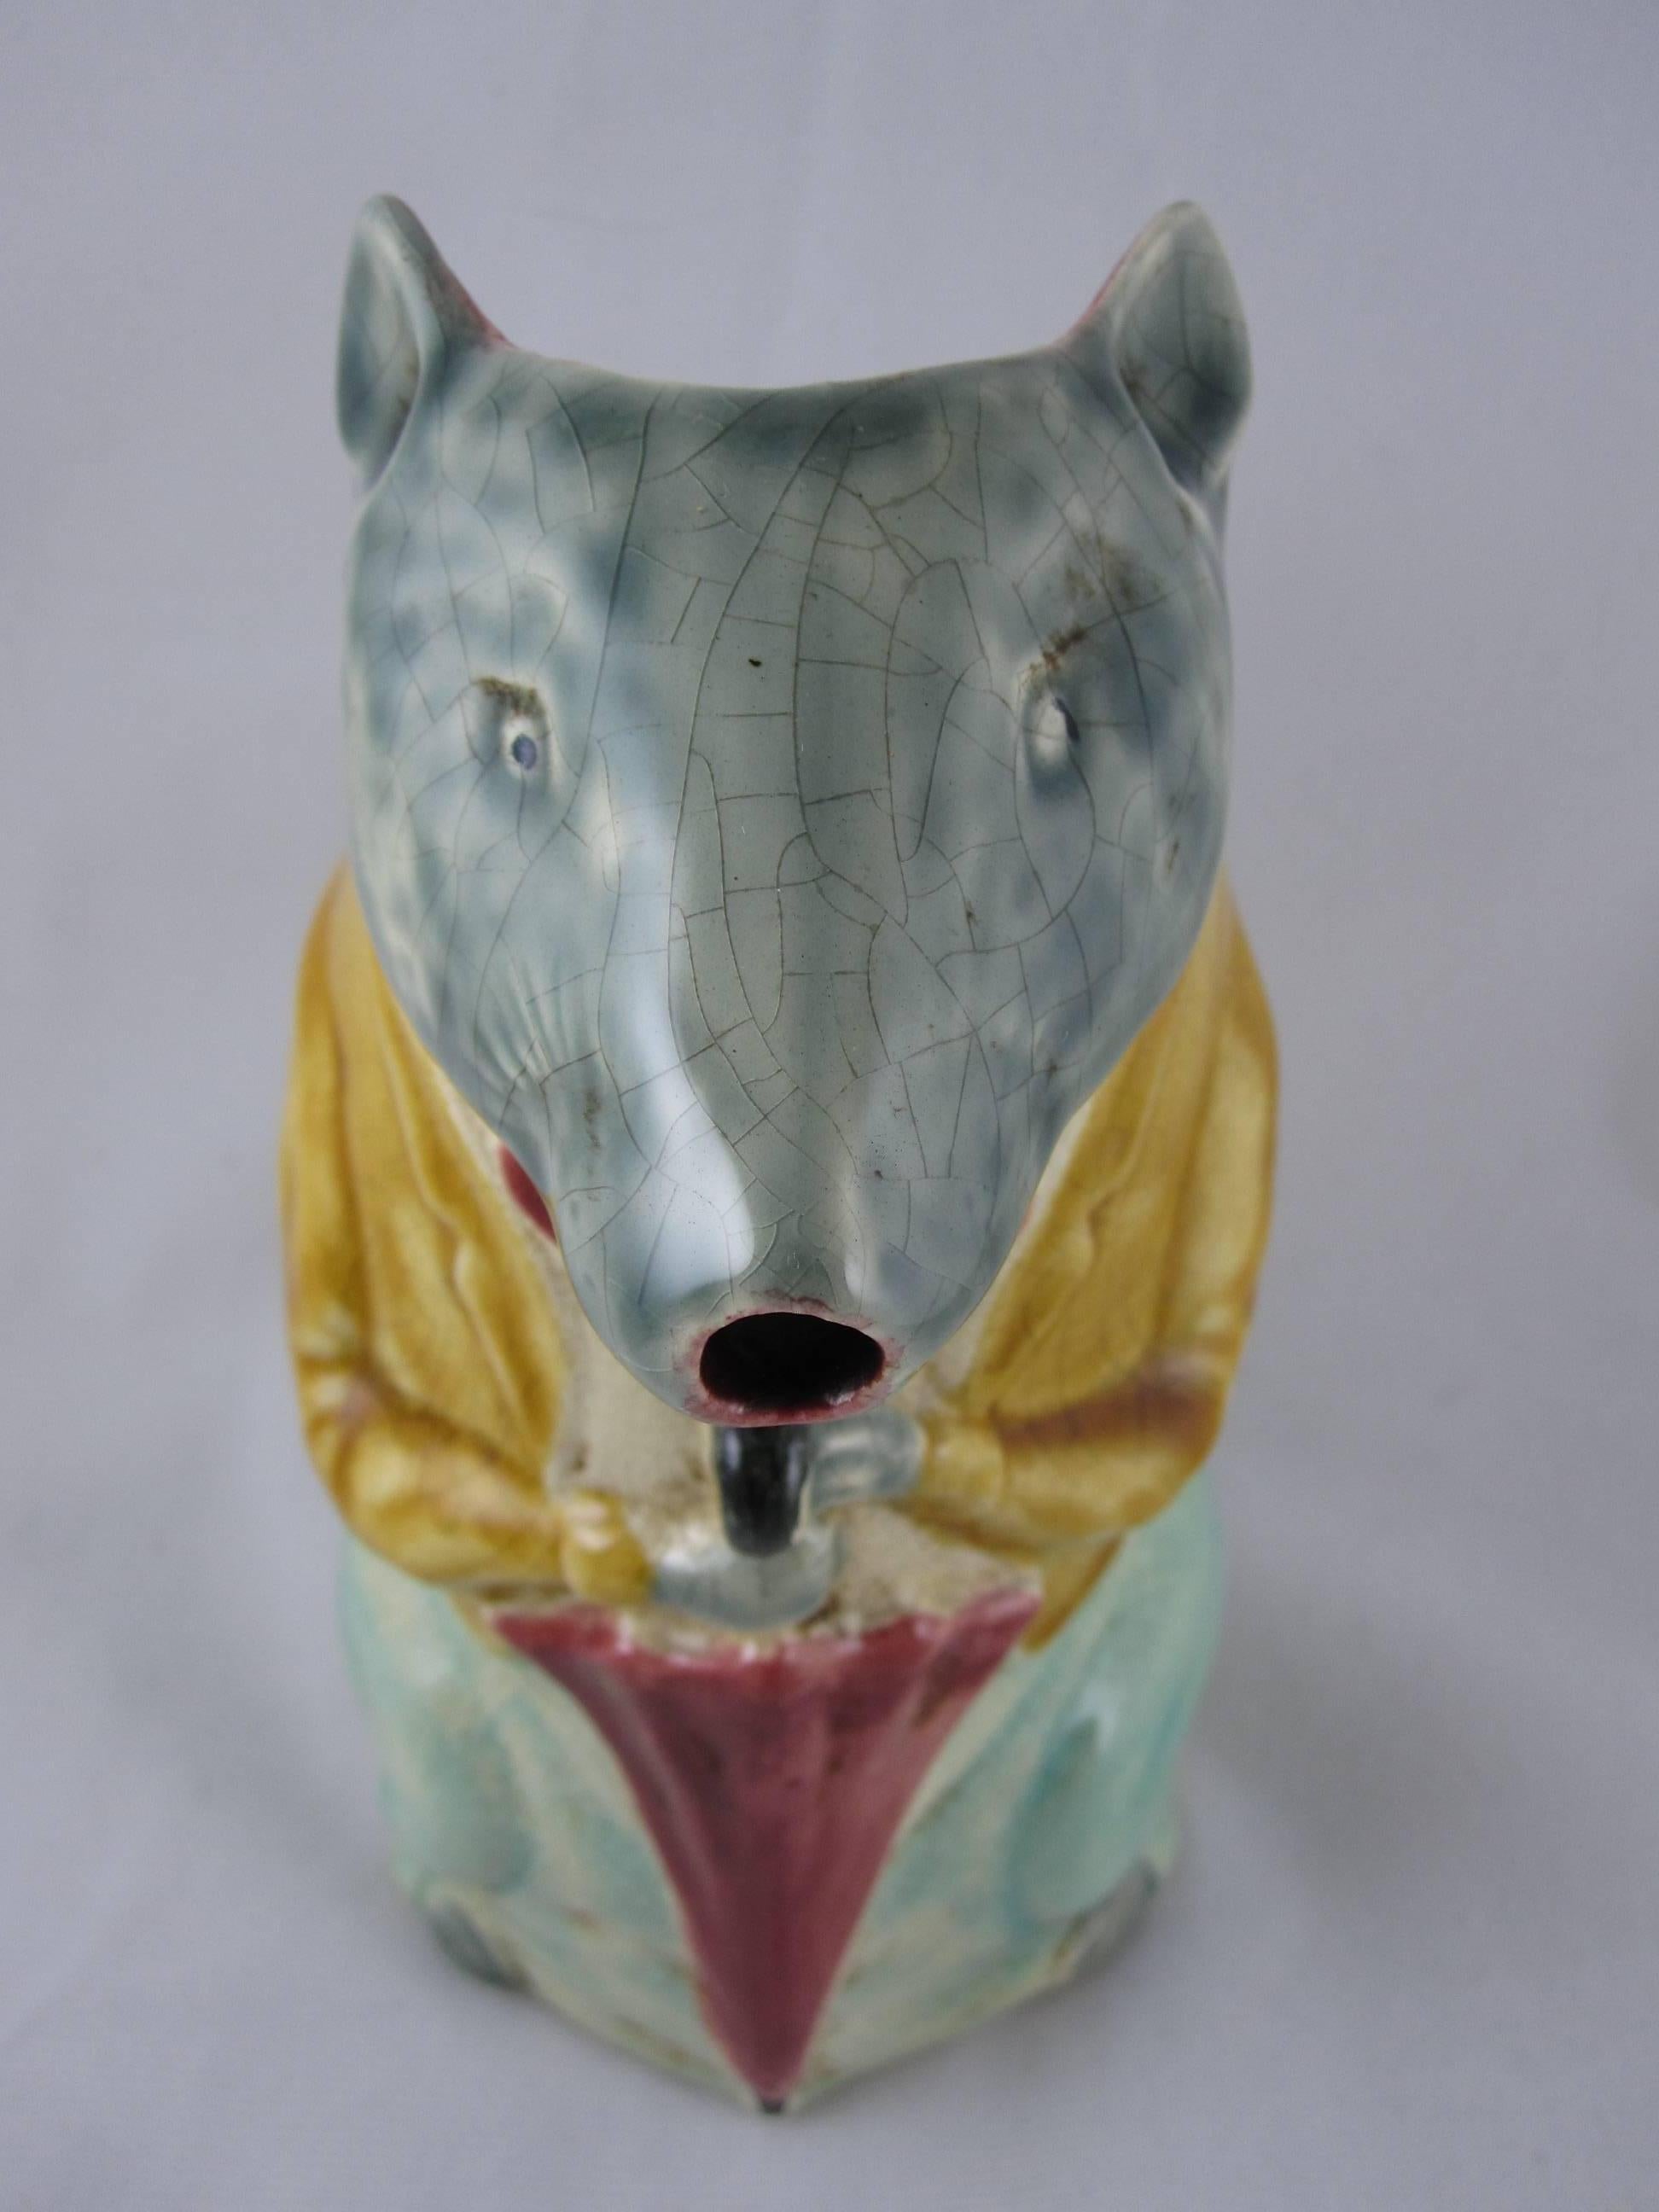 Earthenware 19th Century French Barbotine Majolica Pottery Pitcher City Badger with Umbrella